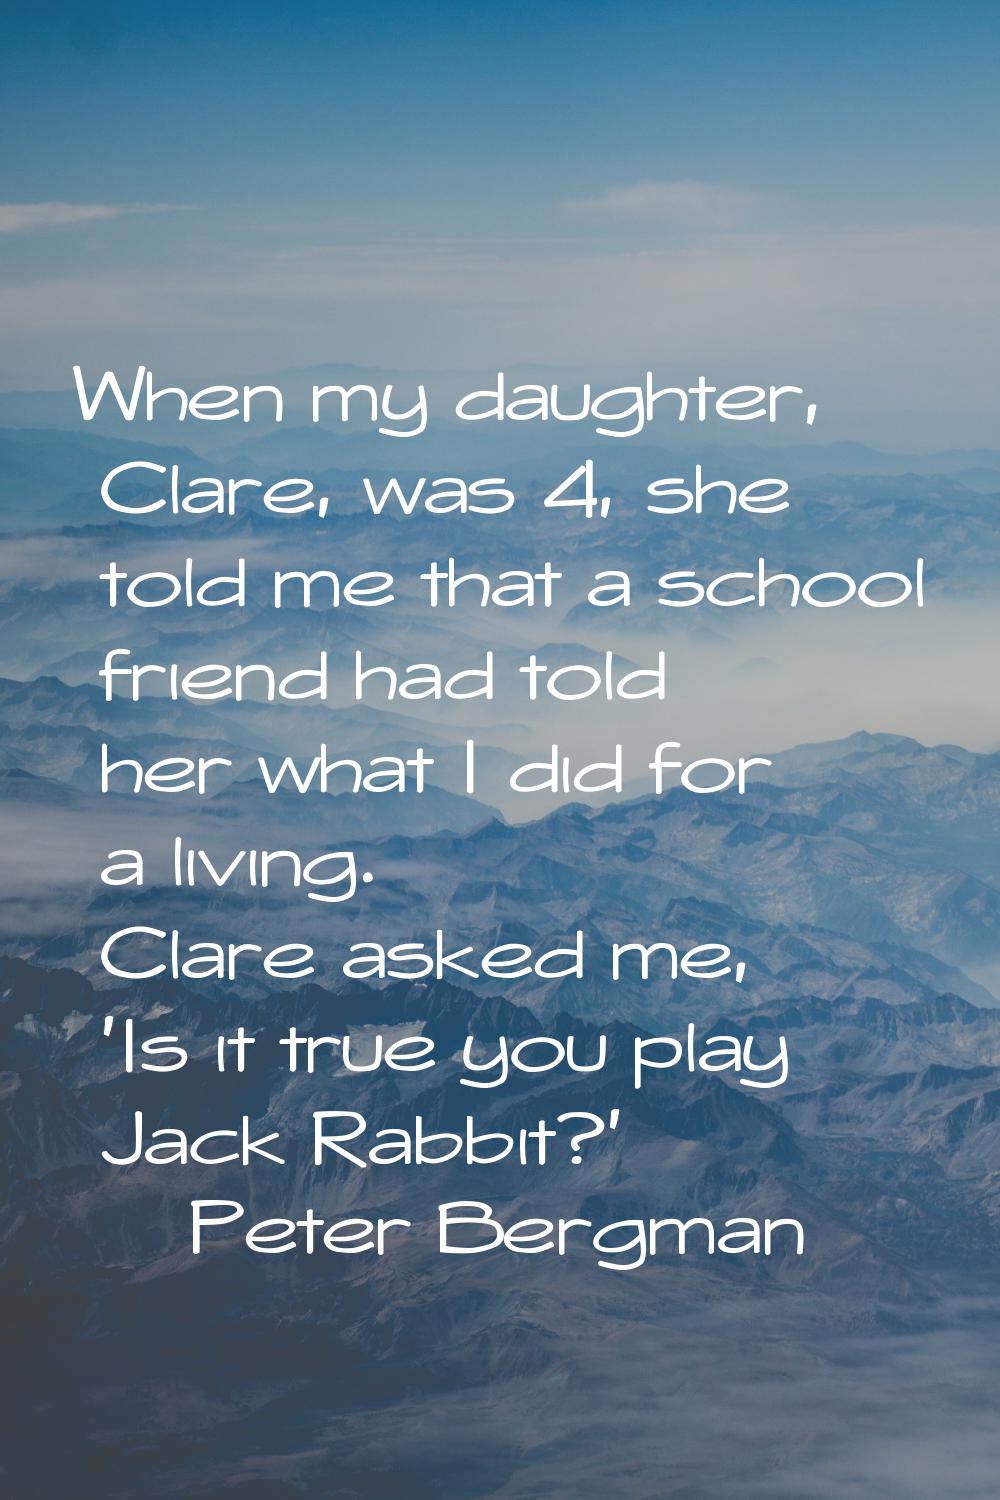 When my daughter, Clare, was 4, she told me that a school friend had told her what I did for a livi